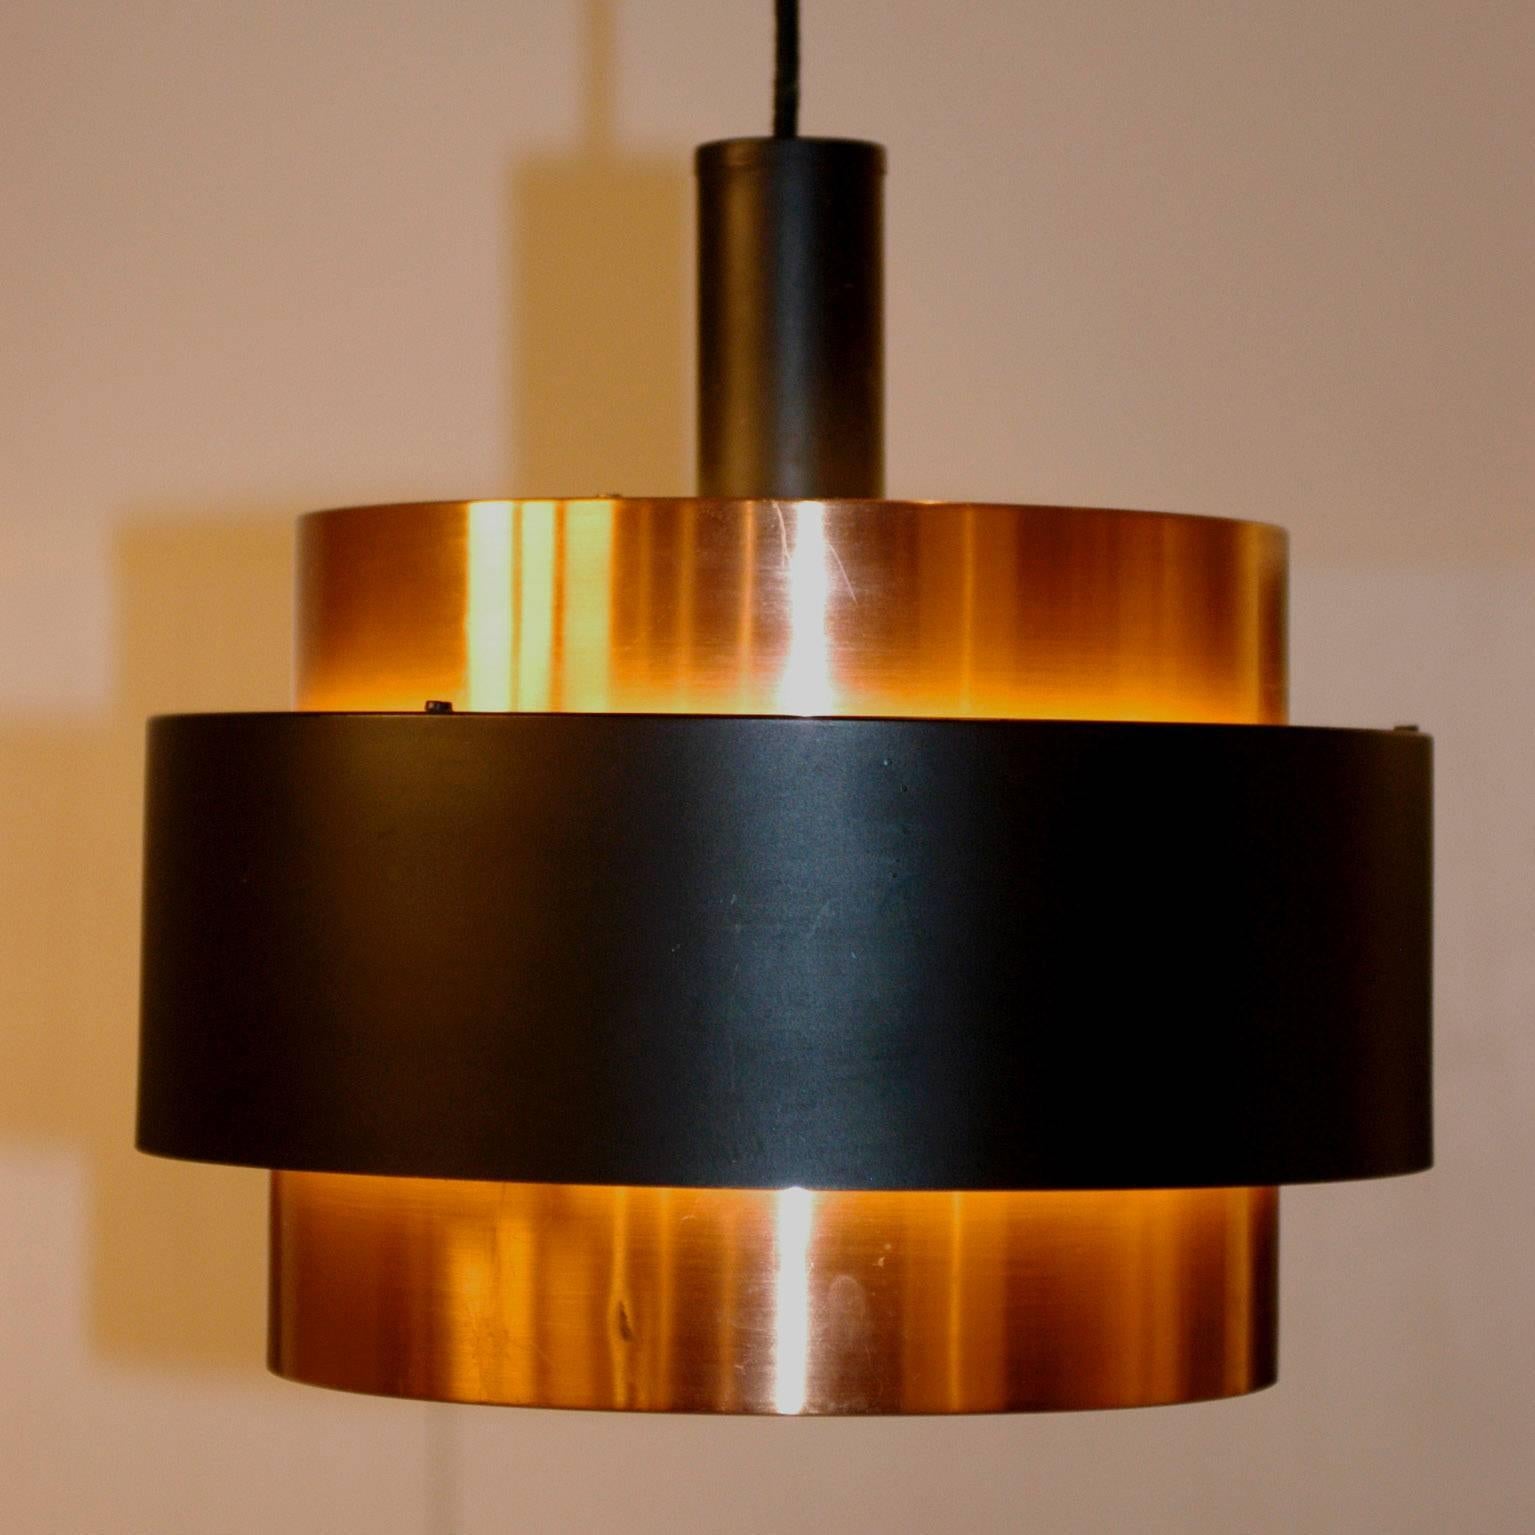 Scandinavian Modern pendant lamp, copper and black laquered metal. Its design is inspired by Jo Hammerborg, just a few details in execution are different to the original manufactured by Fog and Morup
Wonderful light effects!